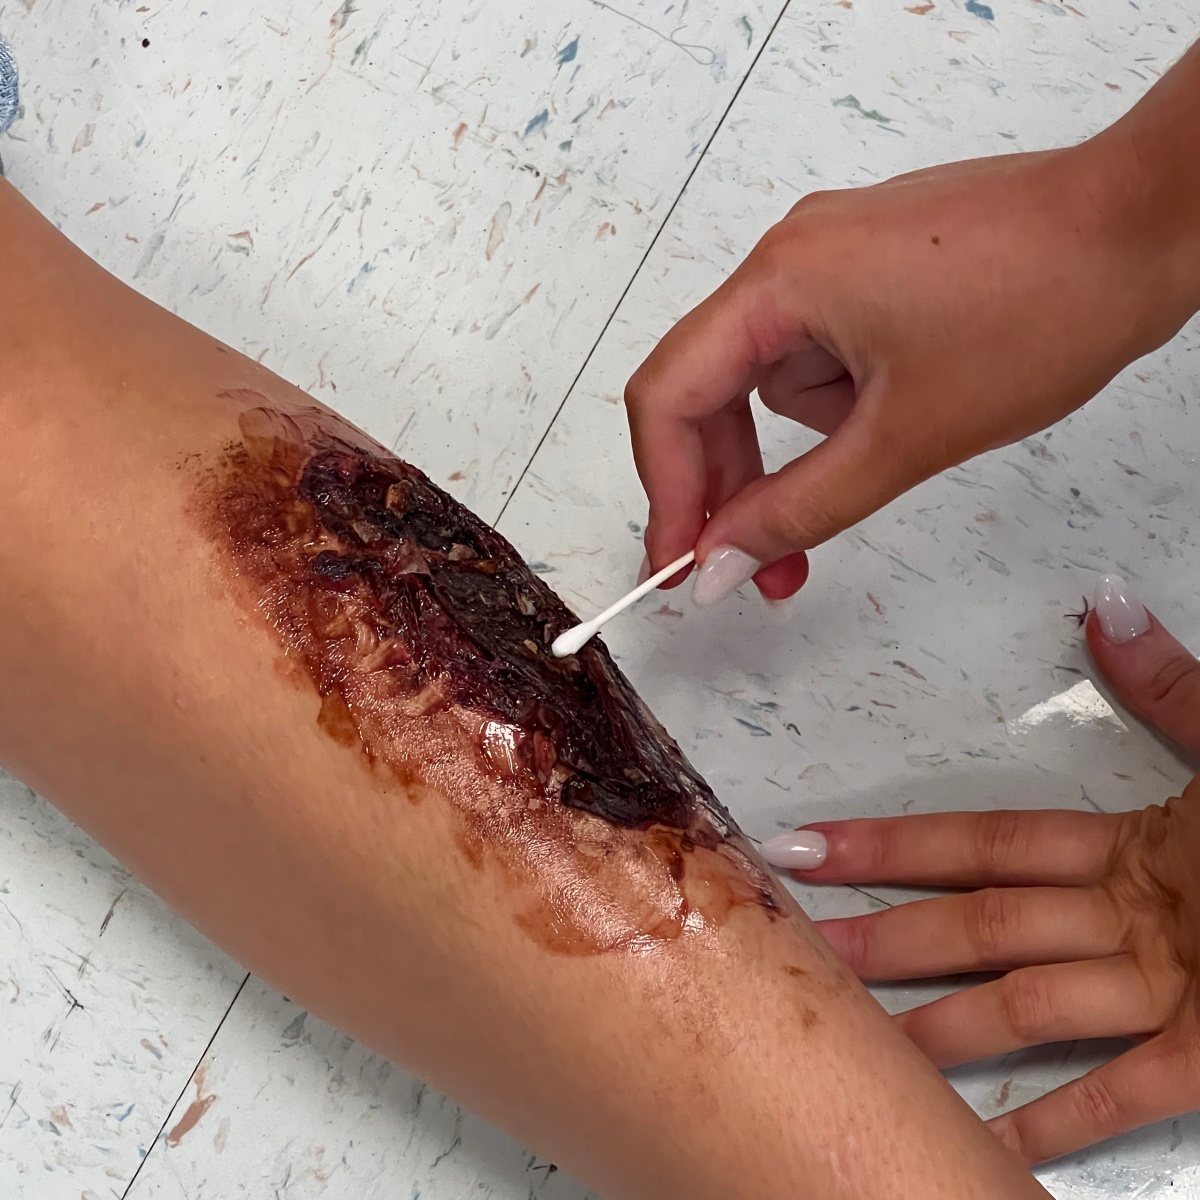 Zombie Bites: A New Trace Evidence Activity for Halloween